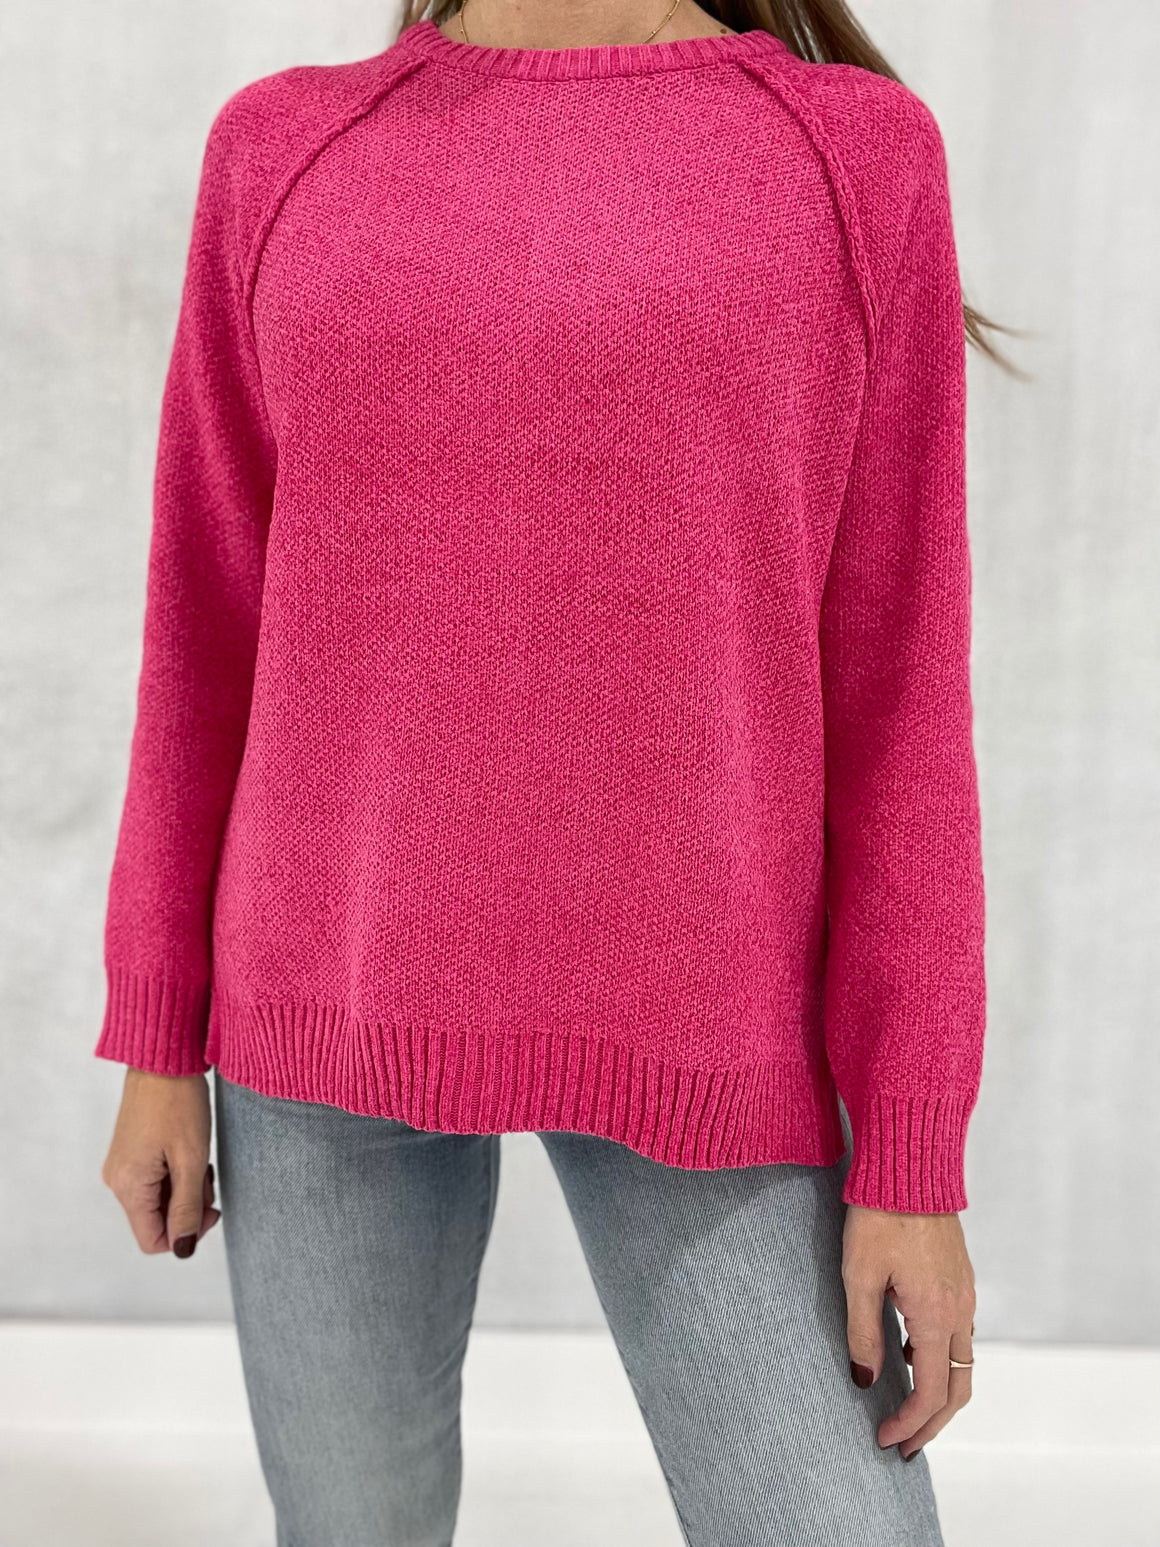 Happiest Here Sweater - Hot Pink